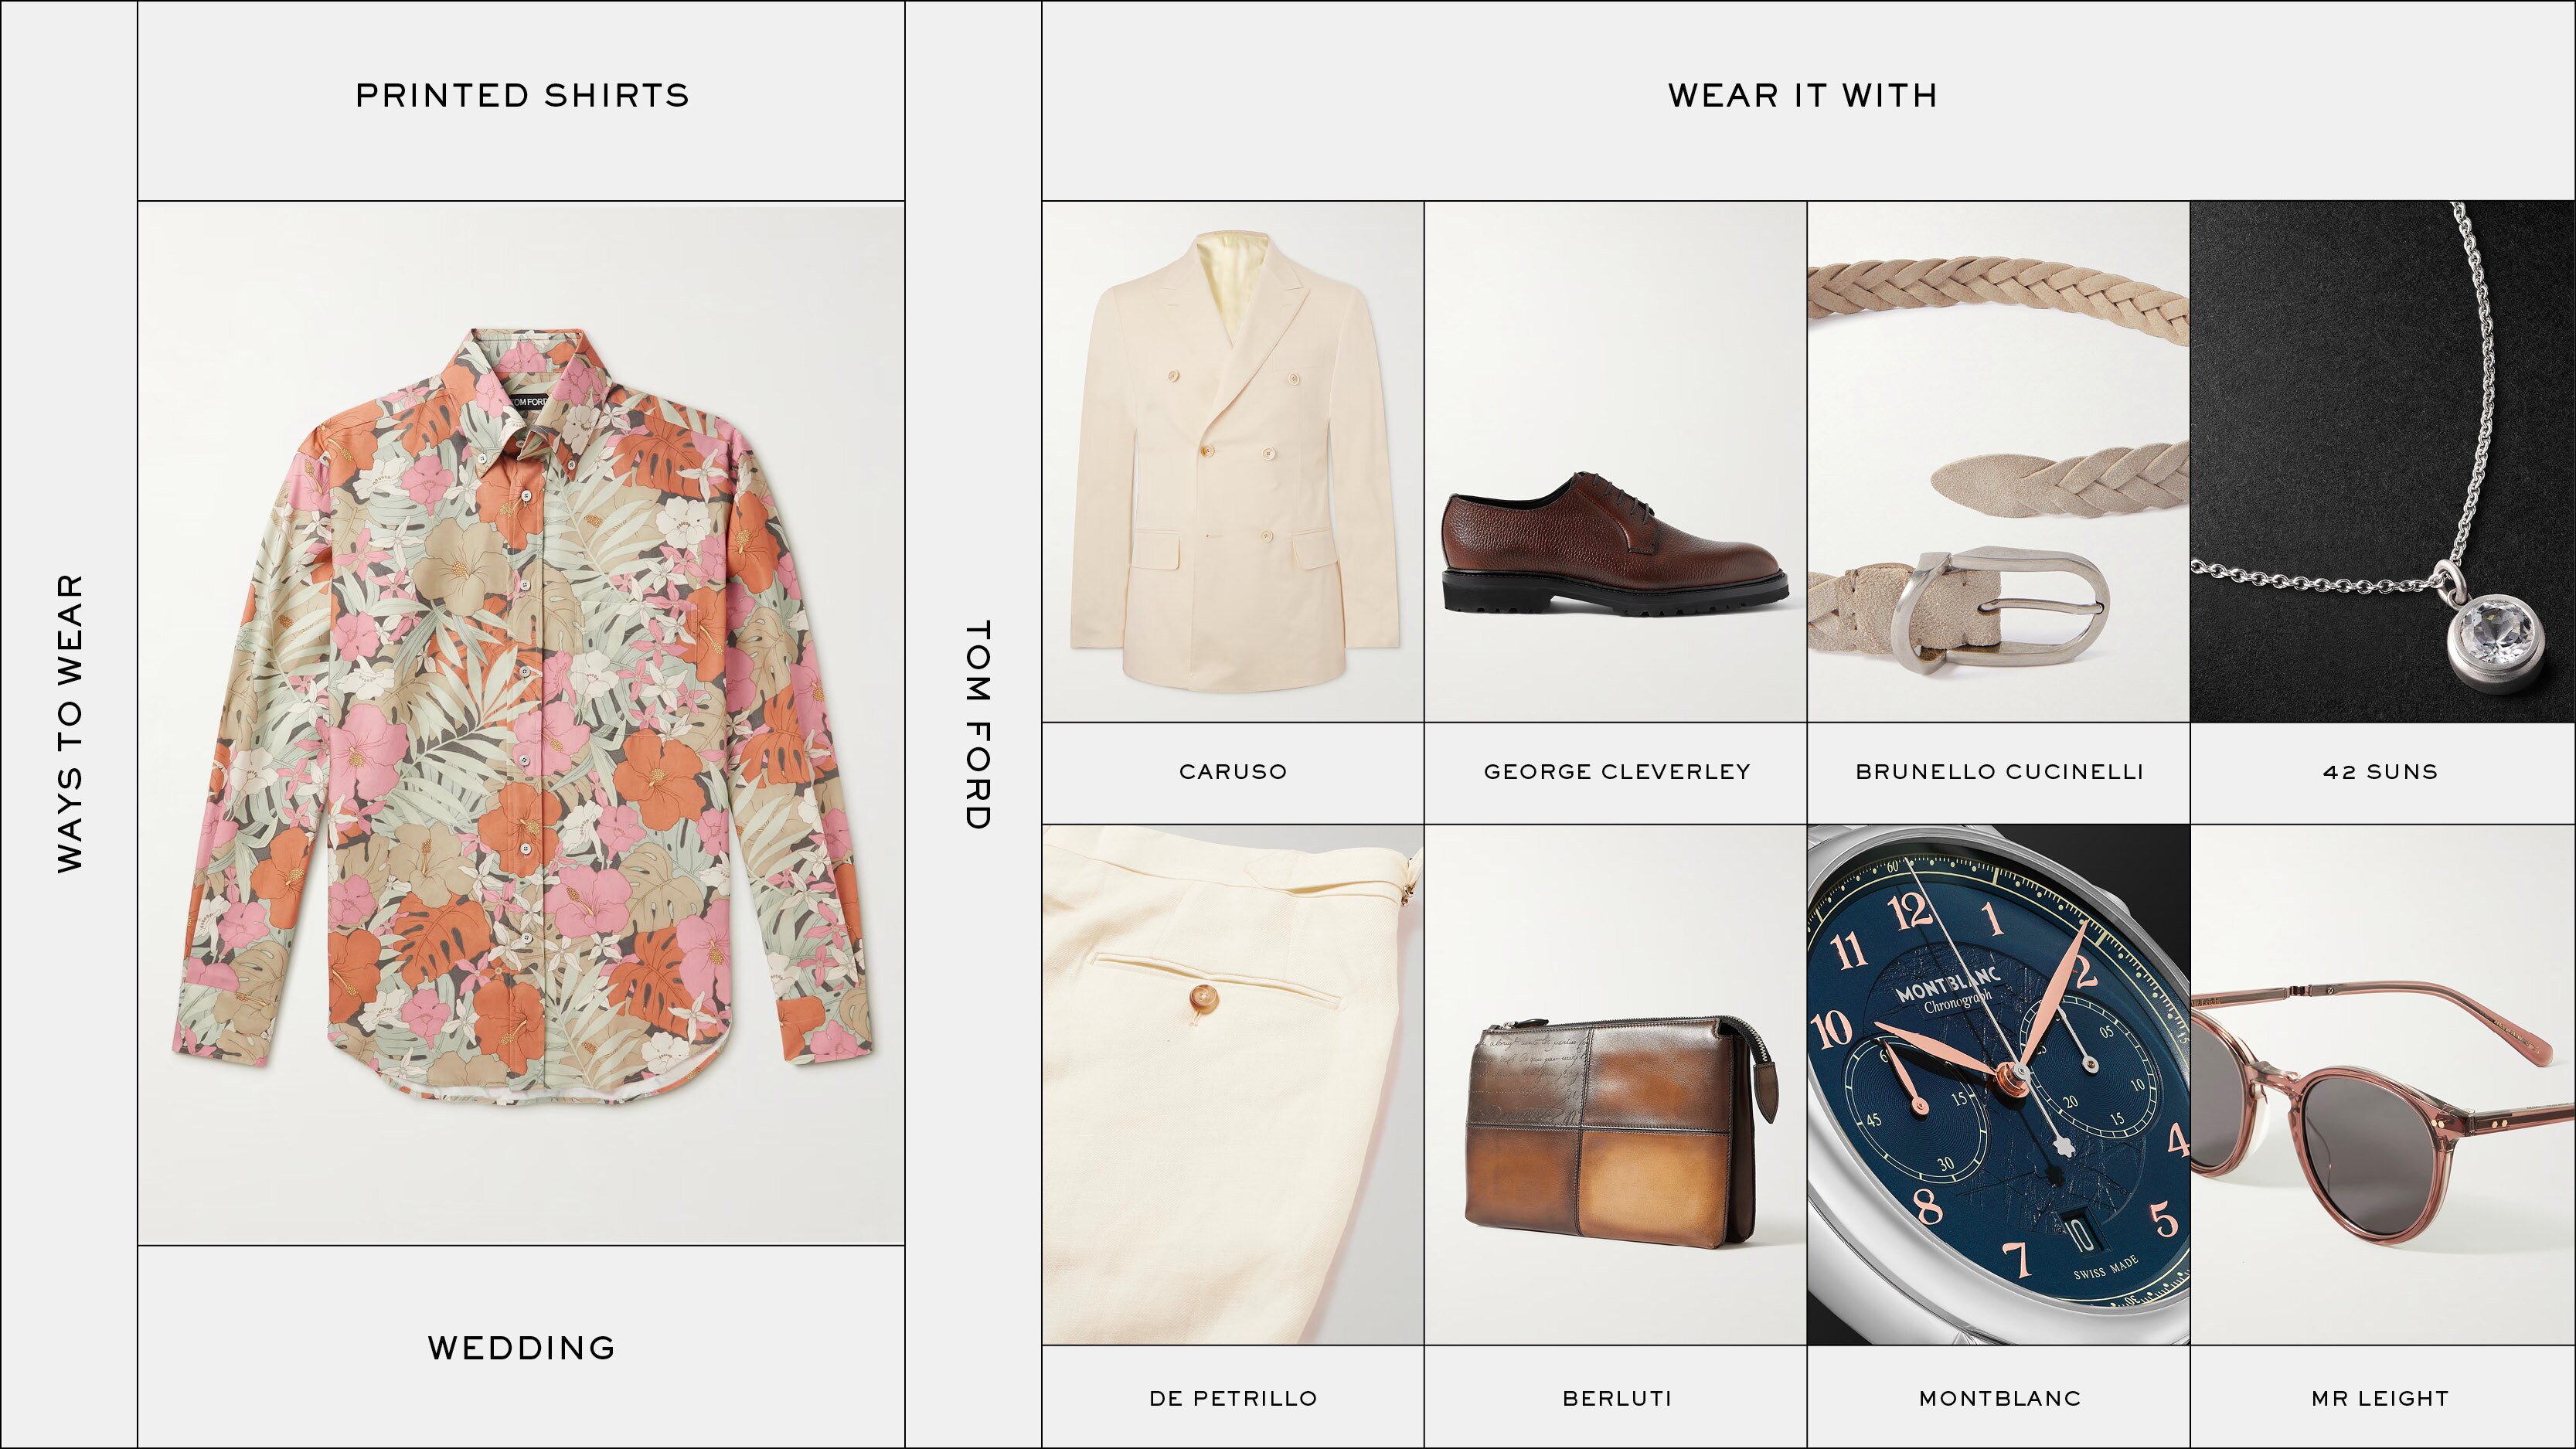 7 Ways to Wear a Printed Shirt